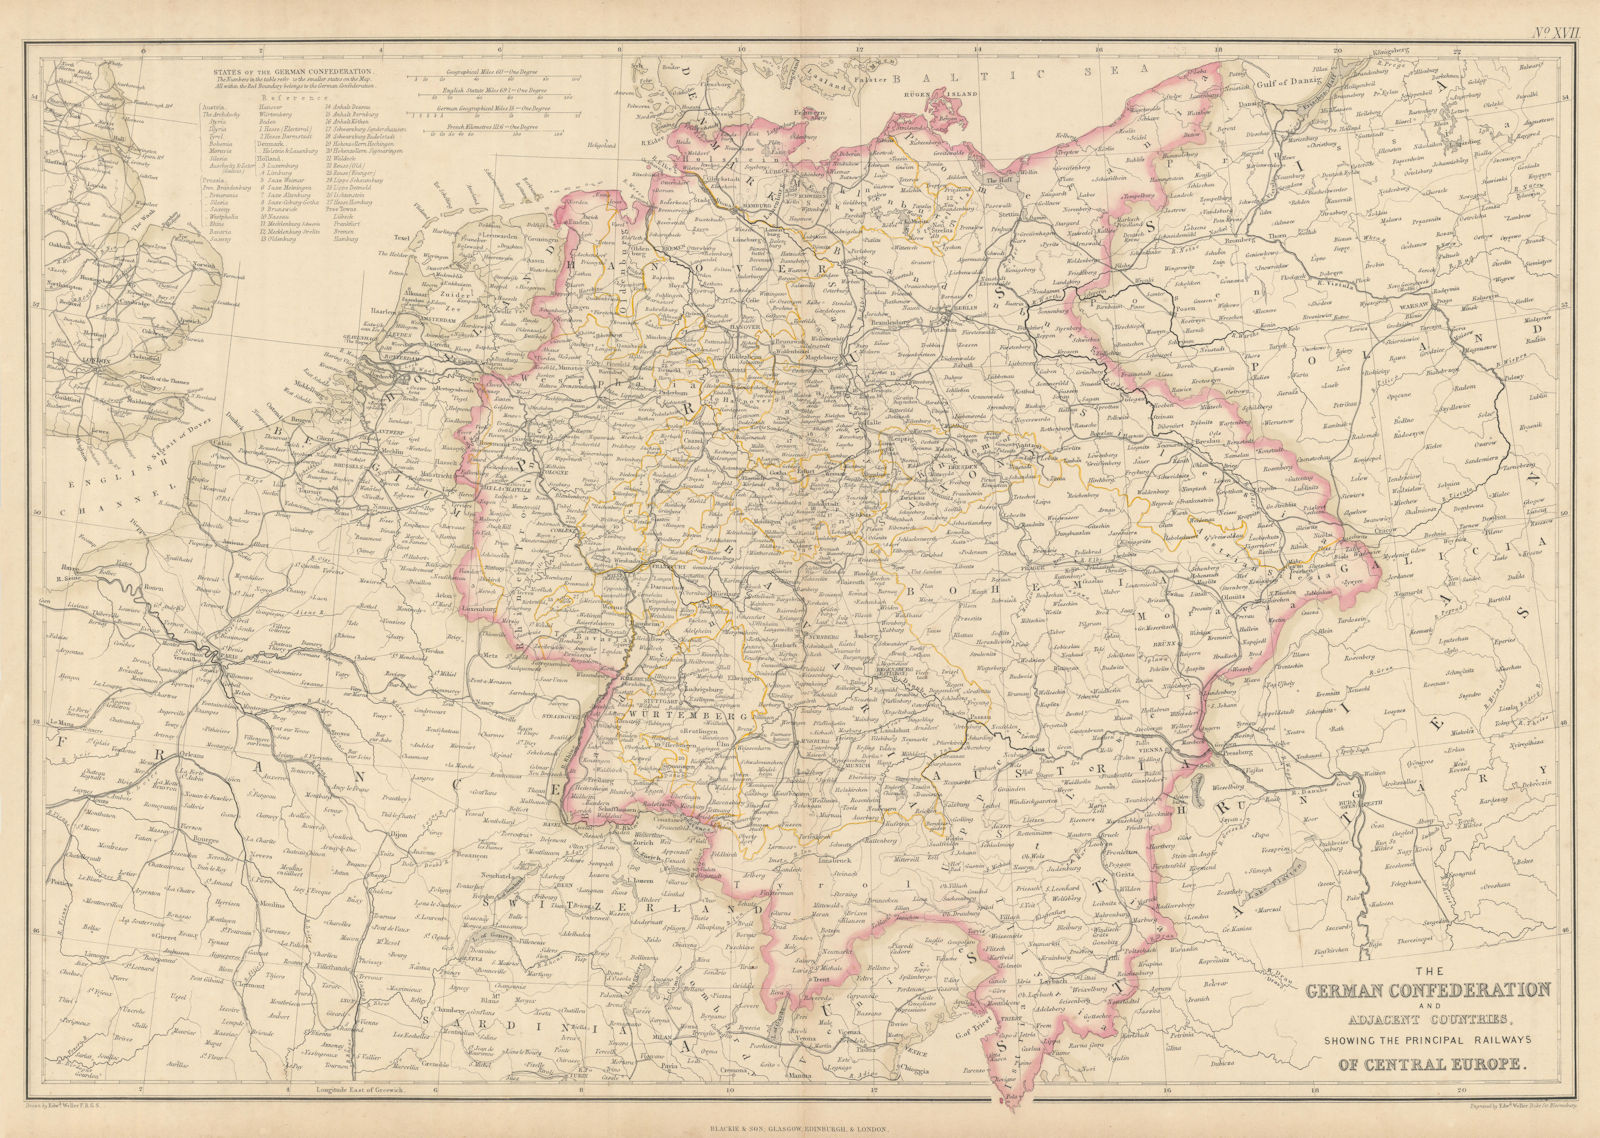 Associate Product German Confederation & Central Europe railways. WELLER 1860 old antique map